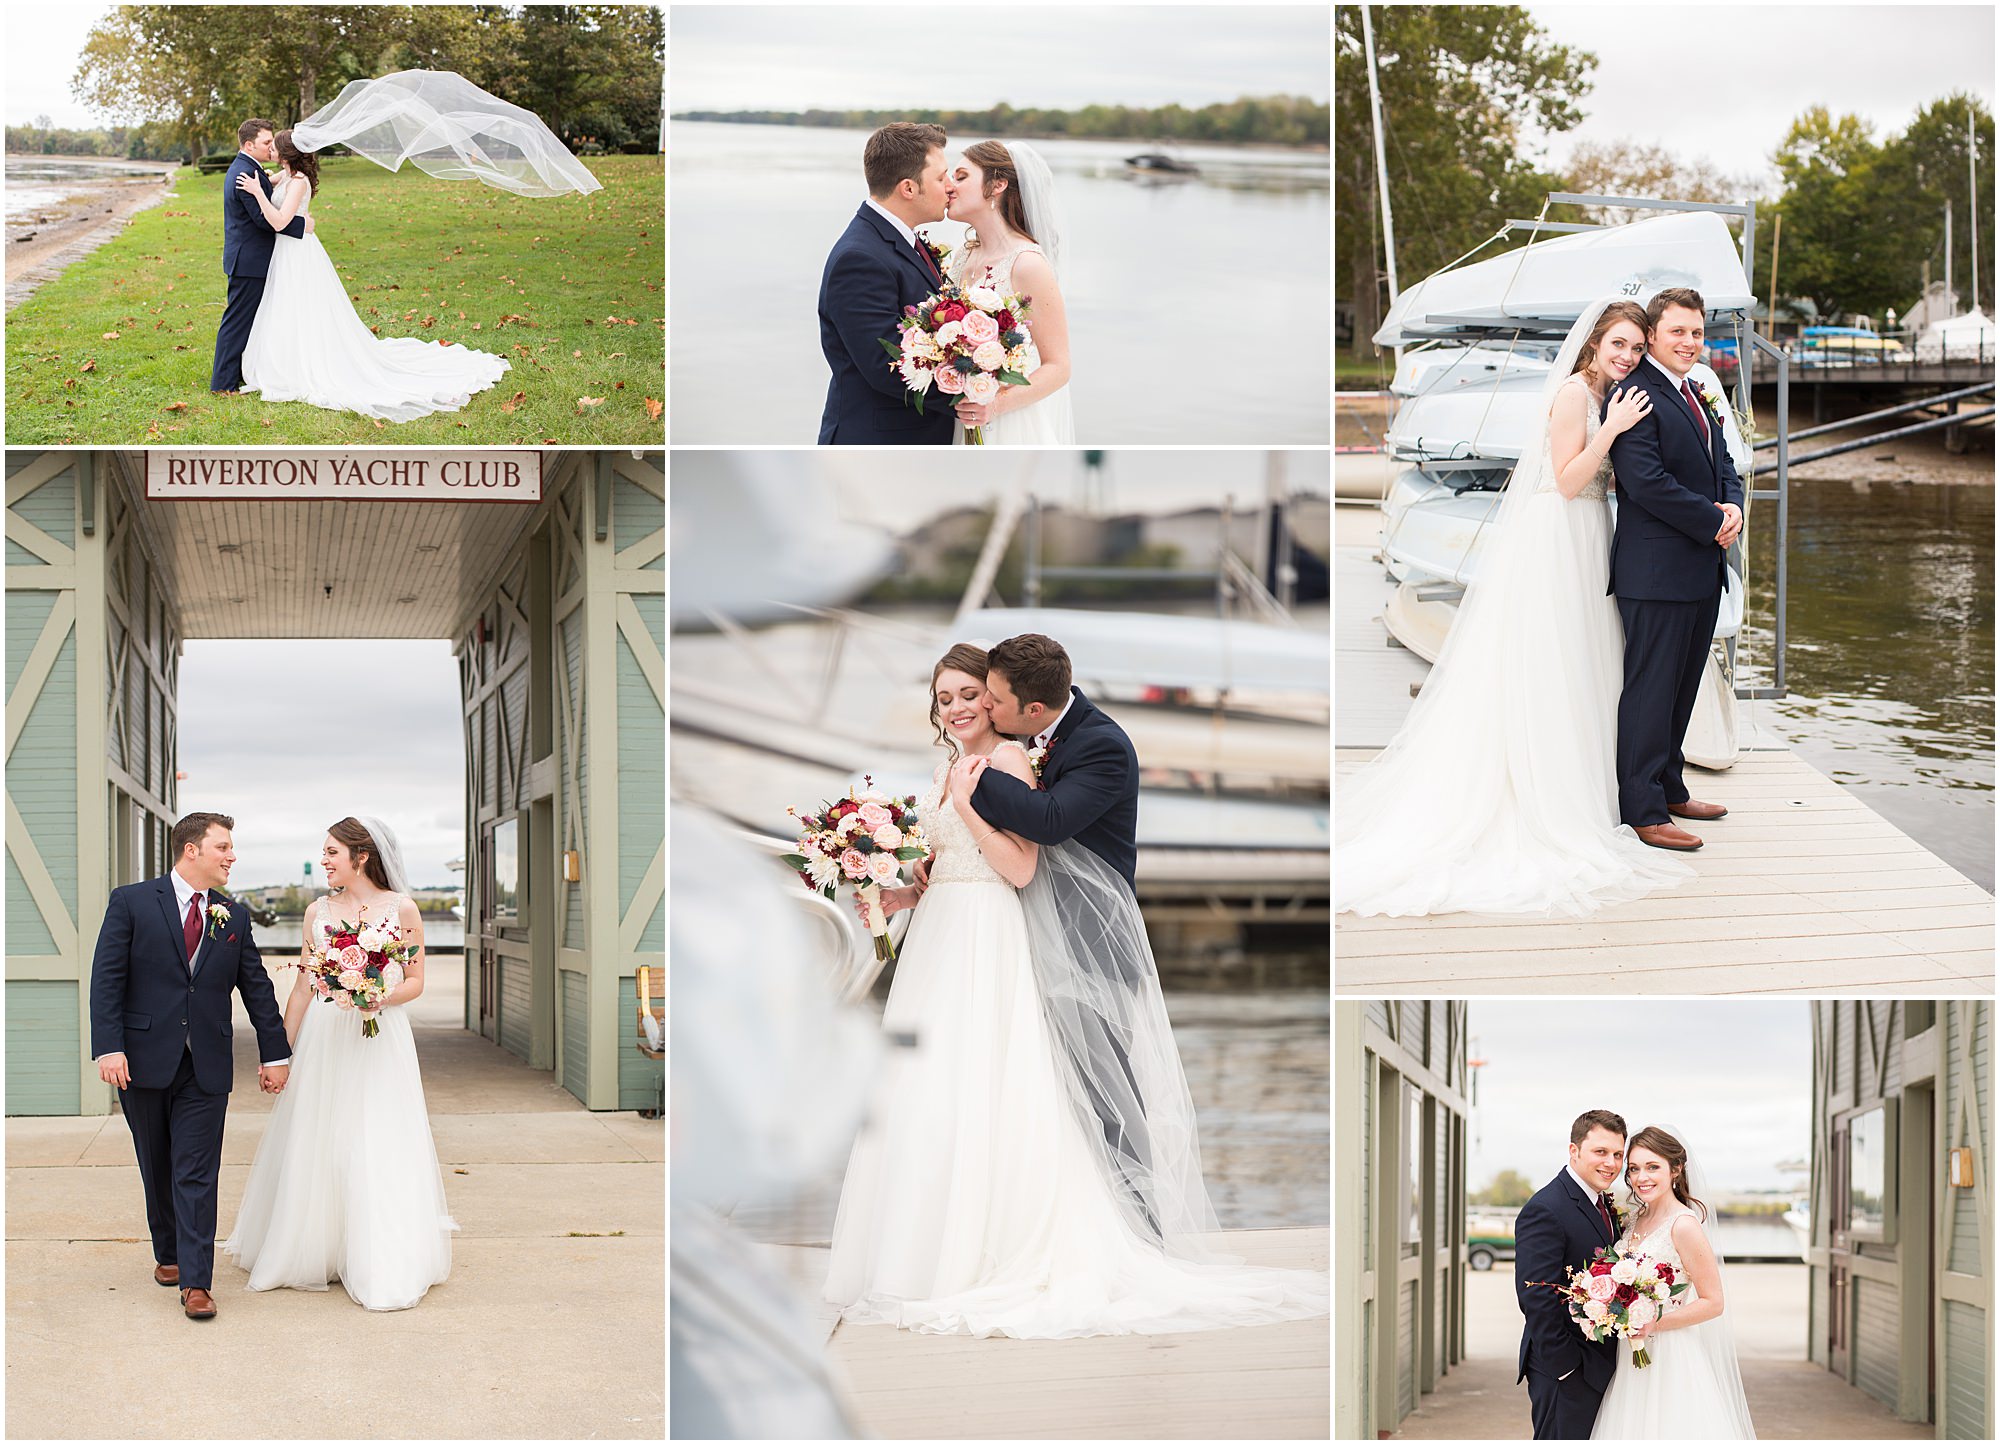 Portraits at the Riverton Yacht Club at The Madison wedding